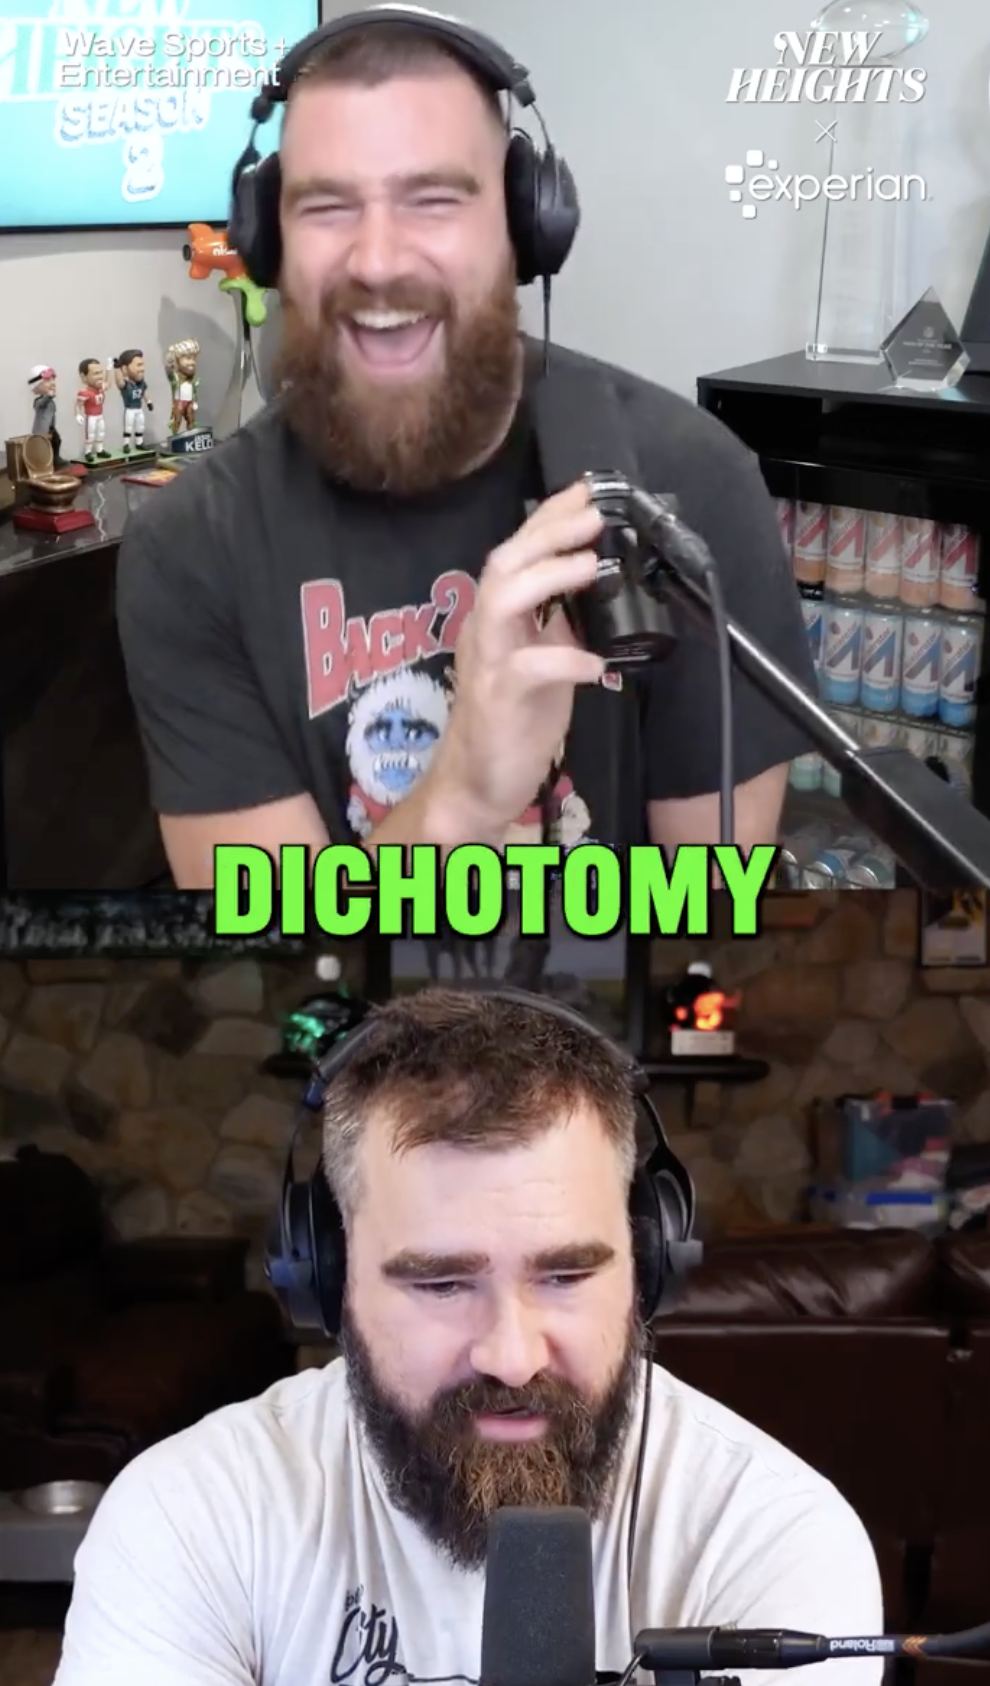 Travis and Jason laughing on a podcast with the word &quot;DICHOTOMY&quot; displayed and action figures in the background